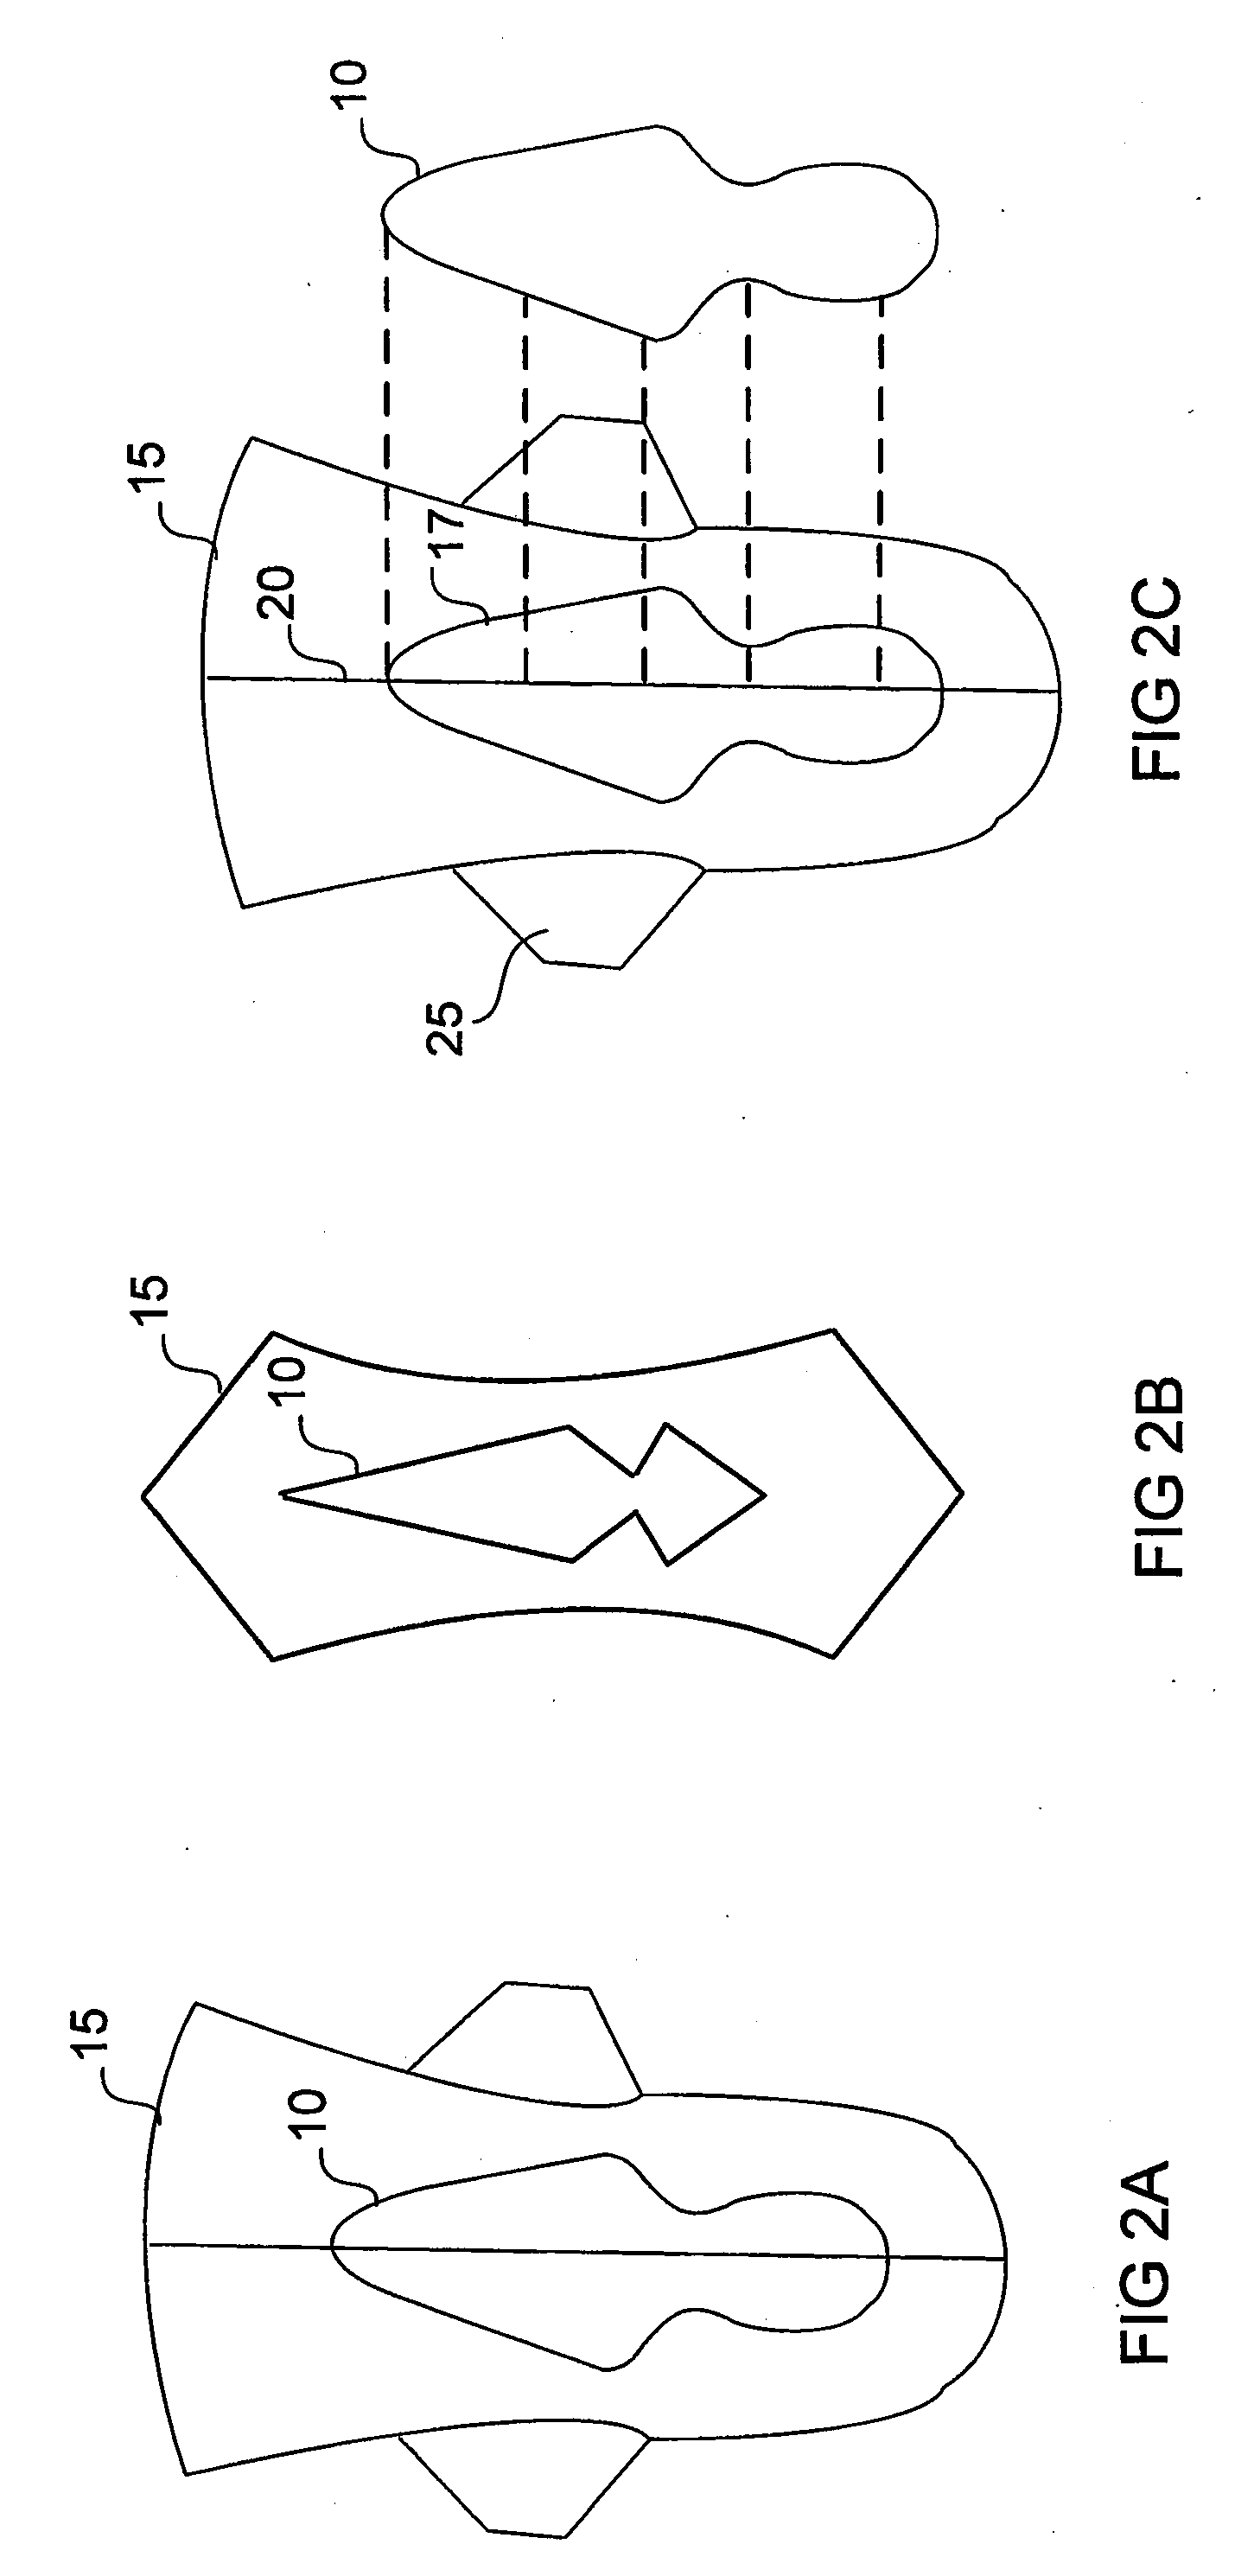 System and method for providing medicinal treatment